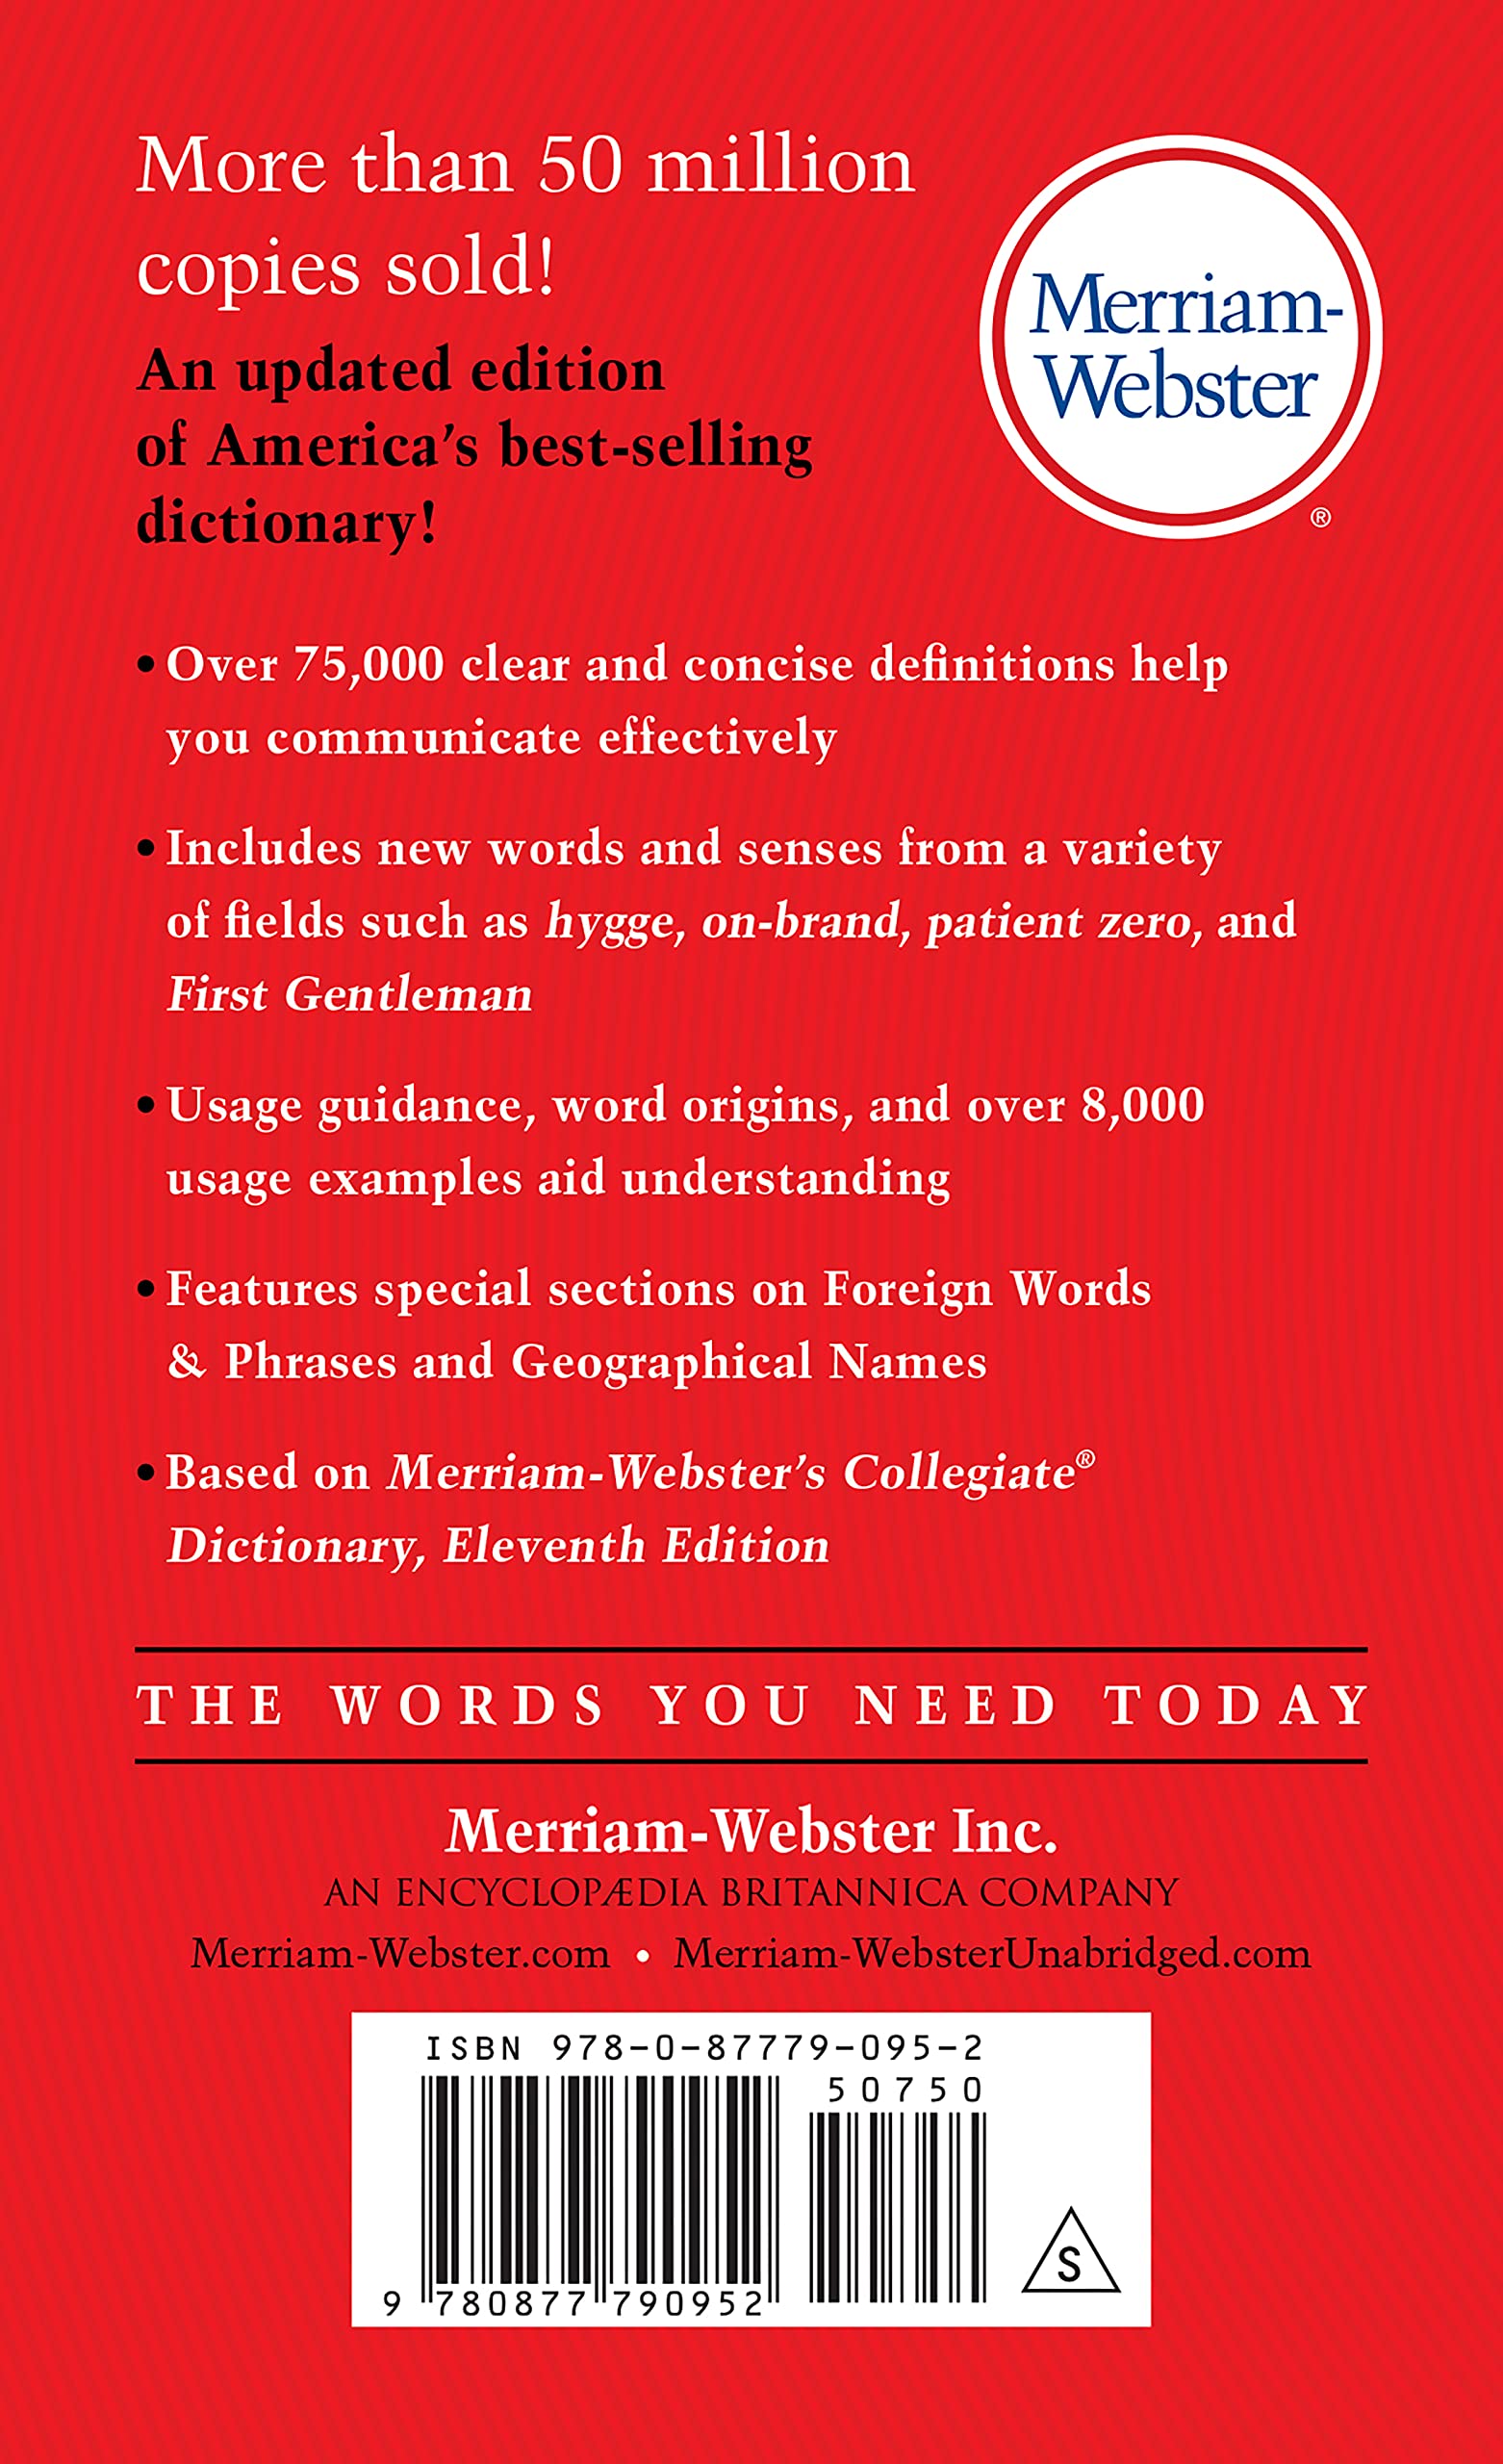 Merriam-Webster’s Everyday Language Reference Set: Includes: The Merriam-Webster Dictionary, The Merriam-Webster Thesaurus, and The Merriam-Webster Vocabulary Builder